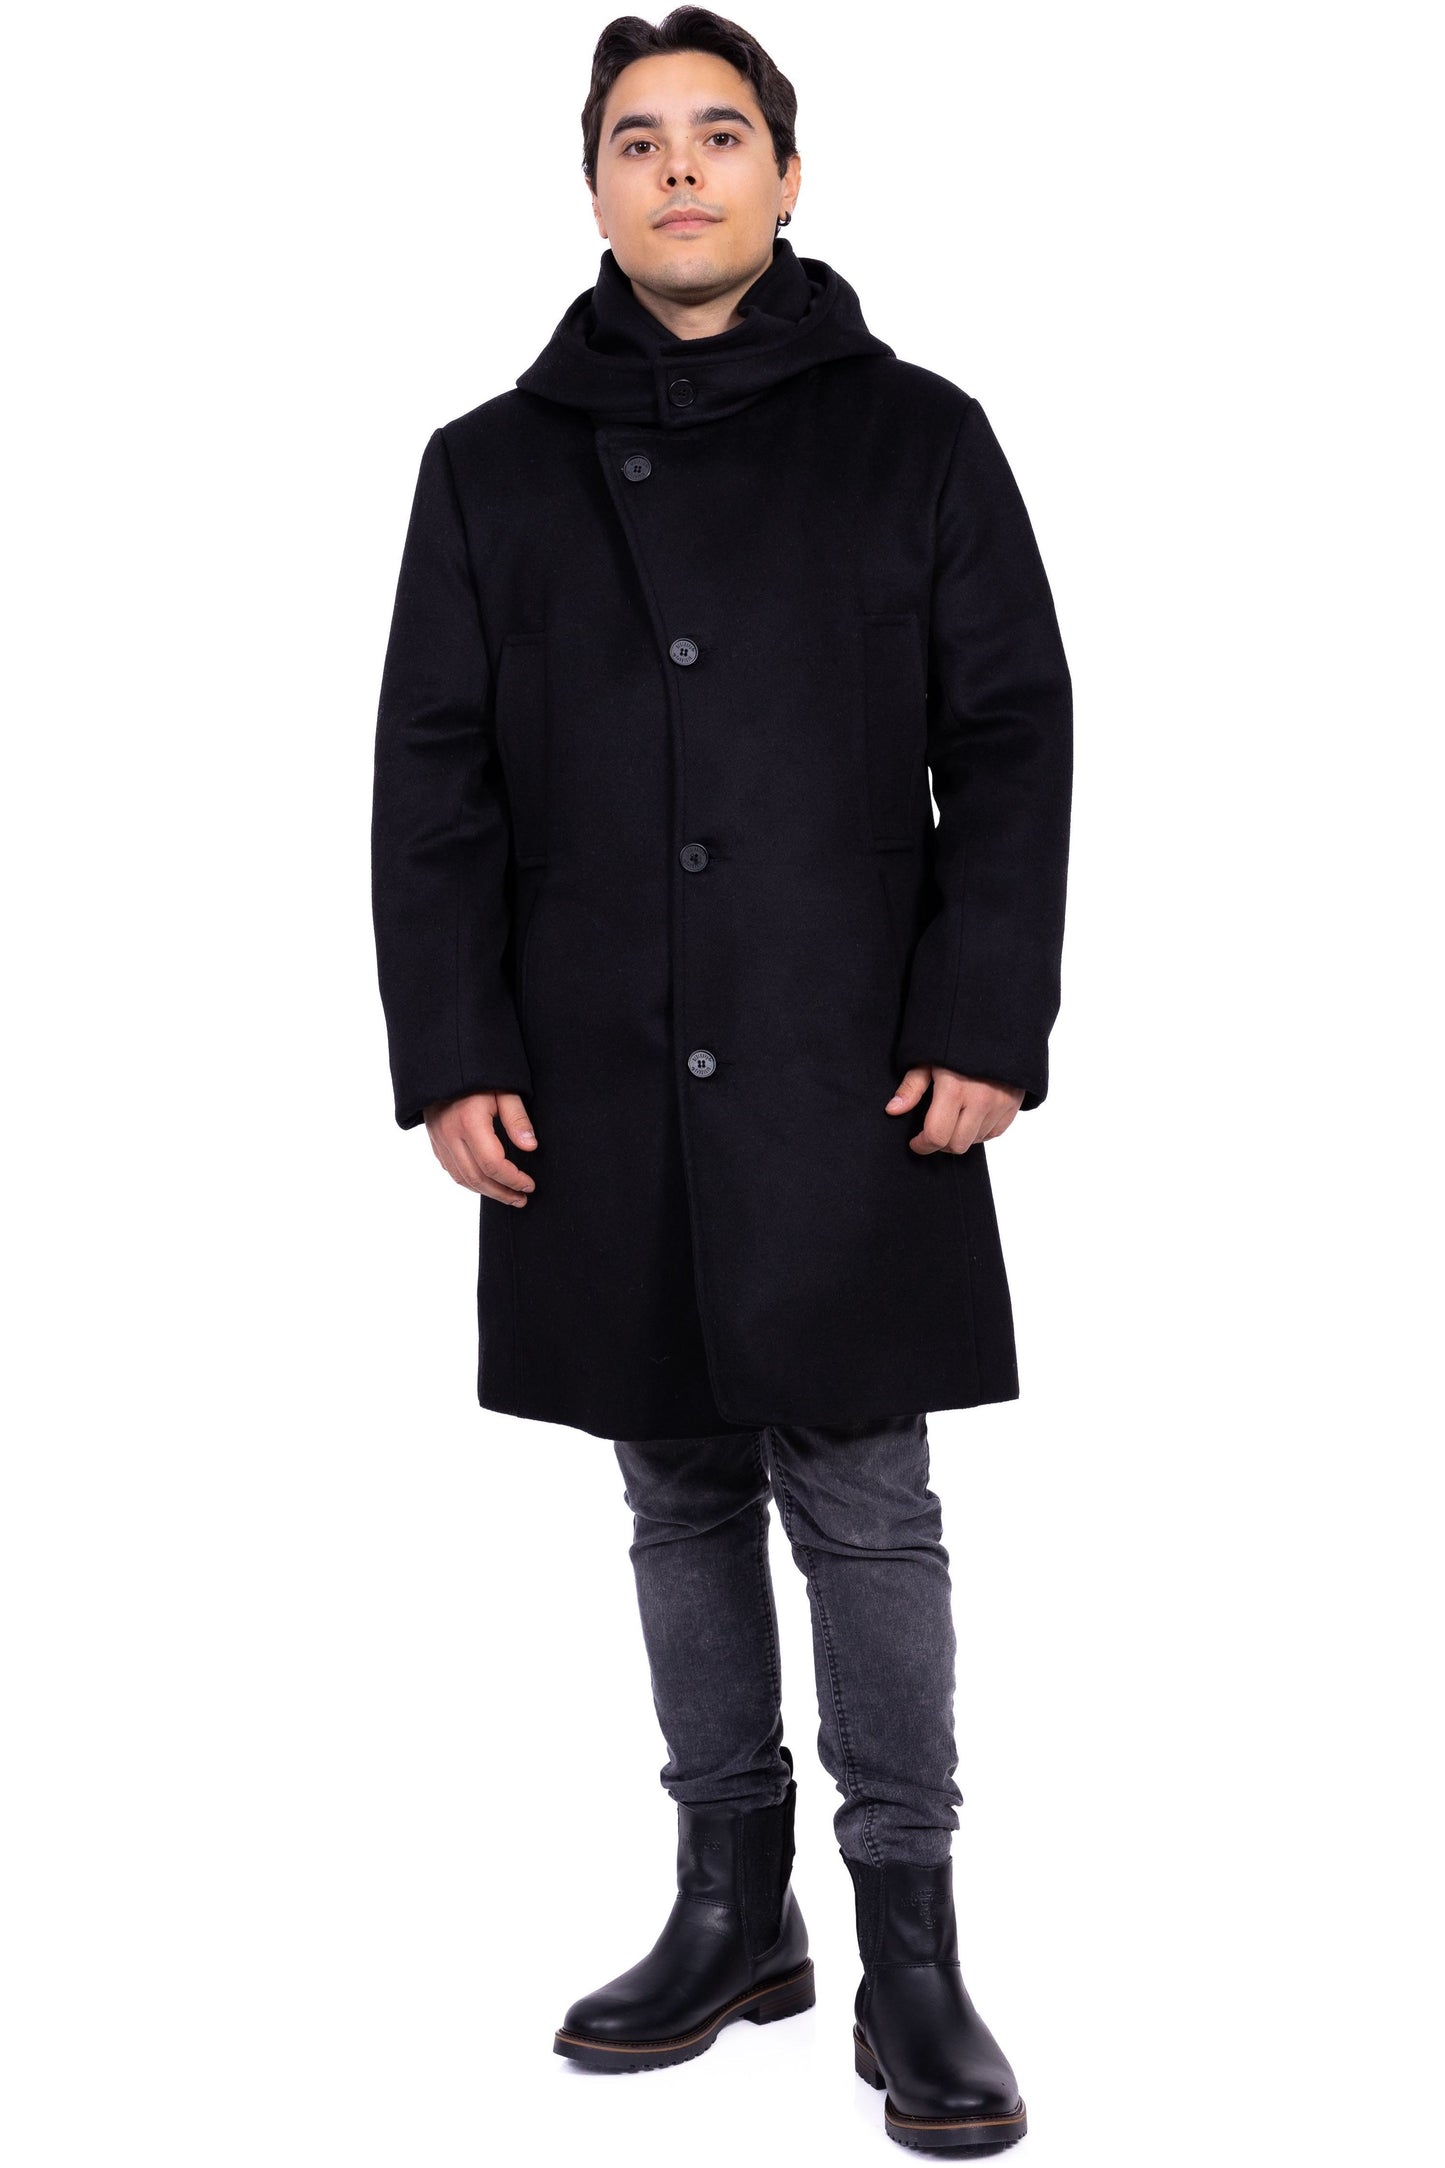 Desloups men's asymmetrical winter coat with detachable hood in 100% wool and lined